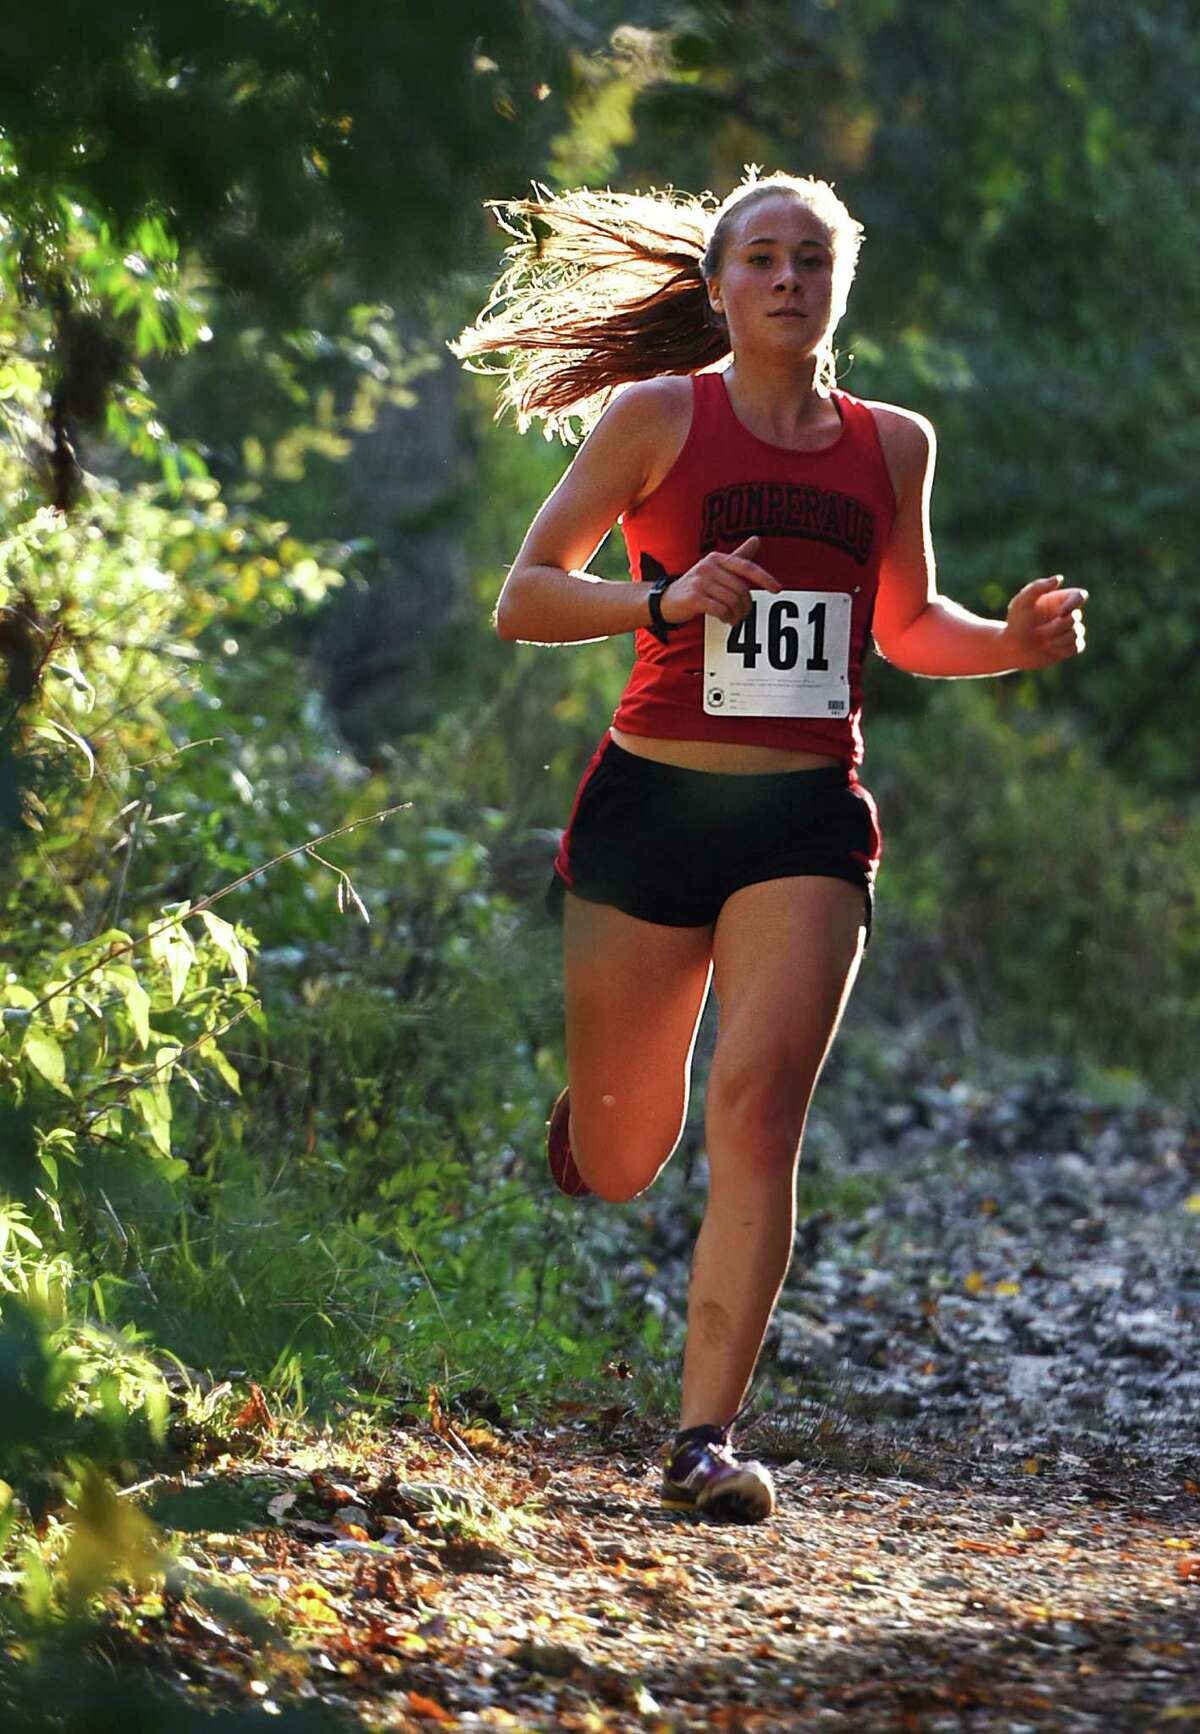 Pomperaug's Sara Tarascio runs in the high school girls SWC cross country championship at Bethel High School in Bethel, Conn. Friday, Oct. 17, 2014. Tarascio finished fourth overall as New Fairfield edged out Pomperaug to win the team event championship.